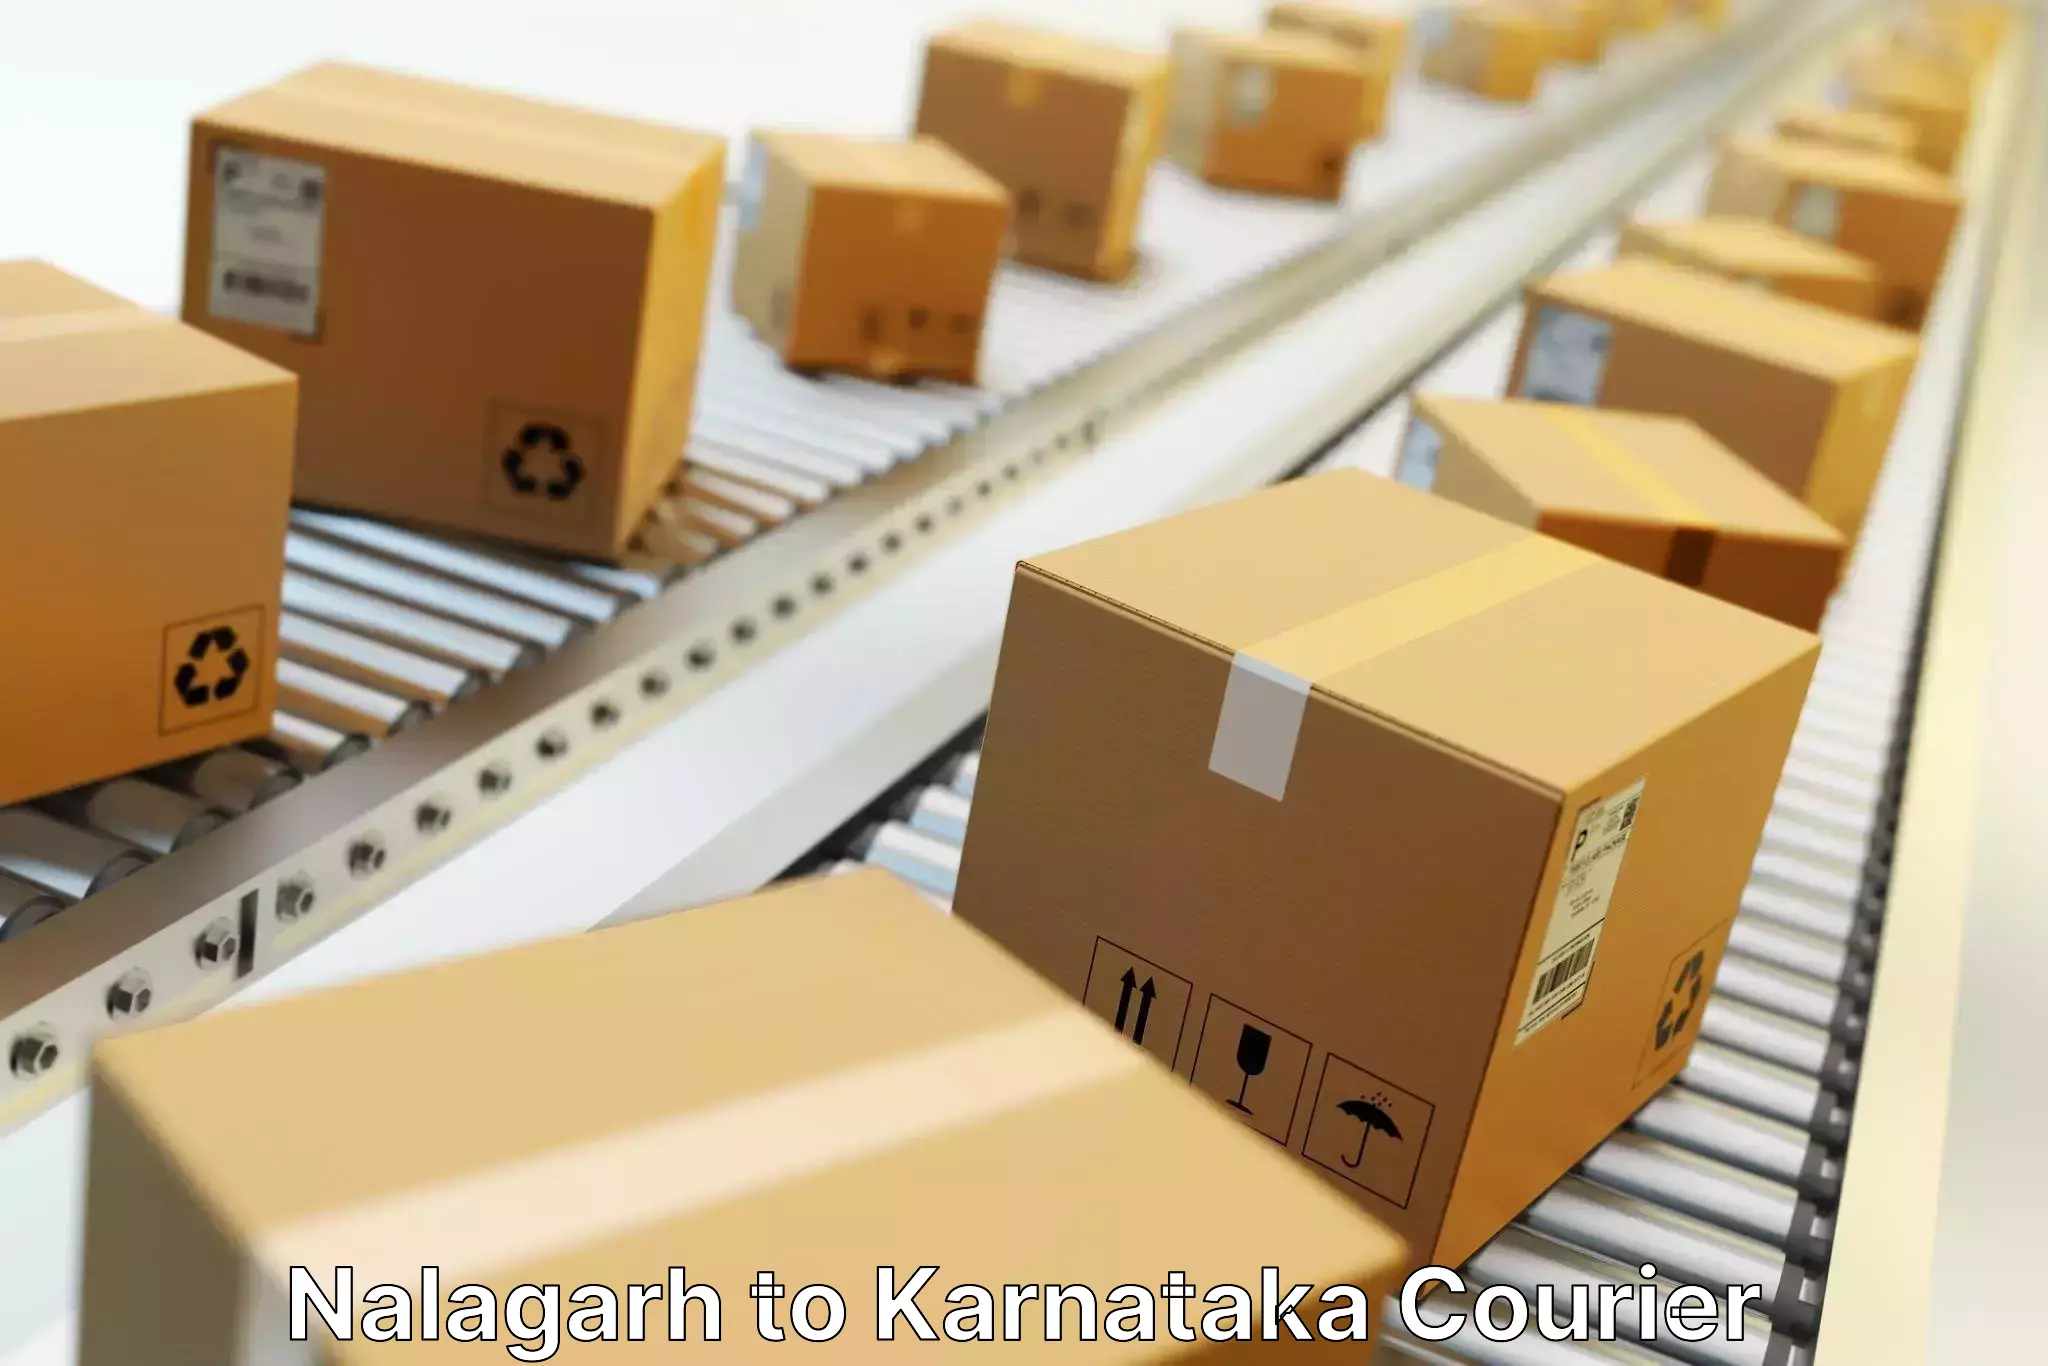 Package delivery network Nalagarh to Gonikoppal